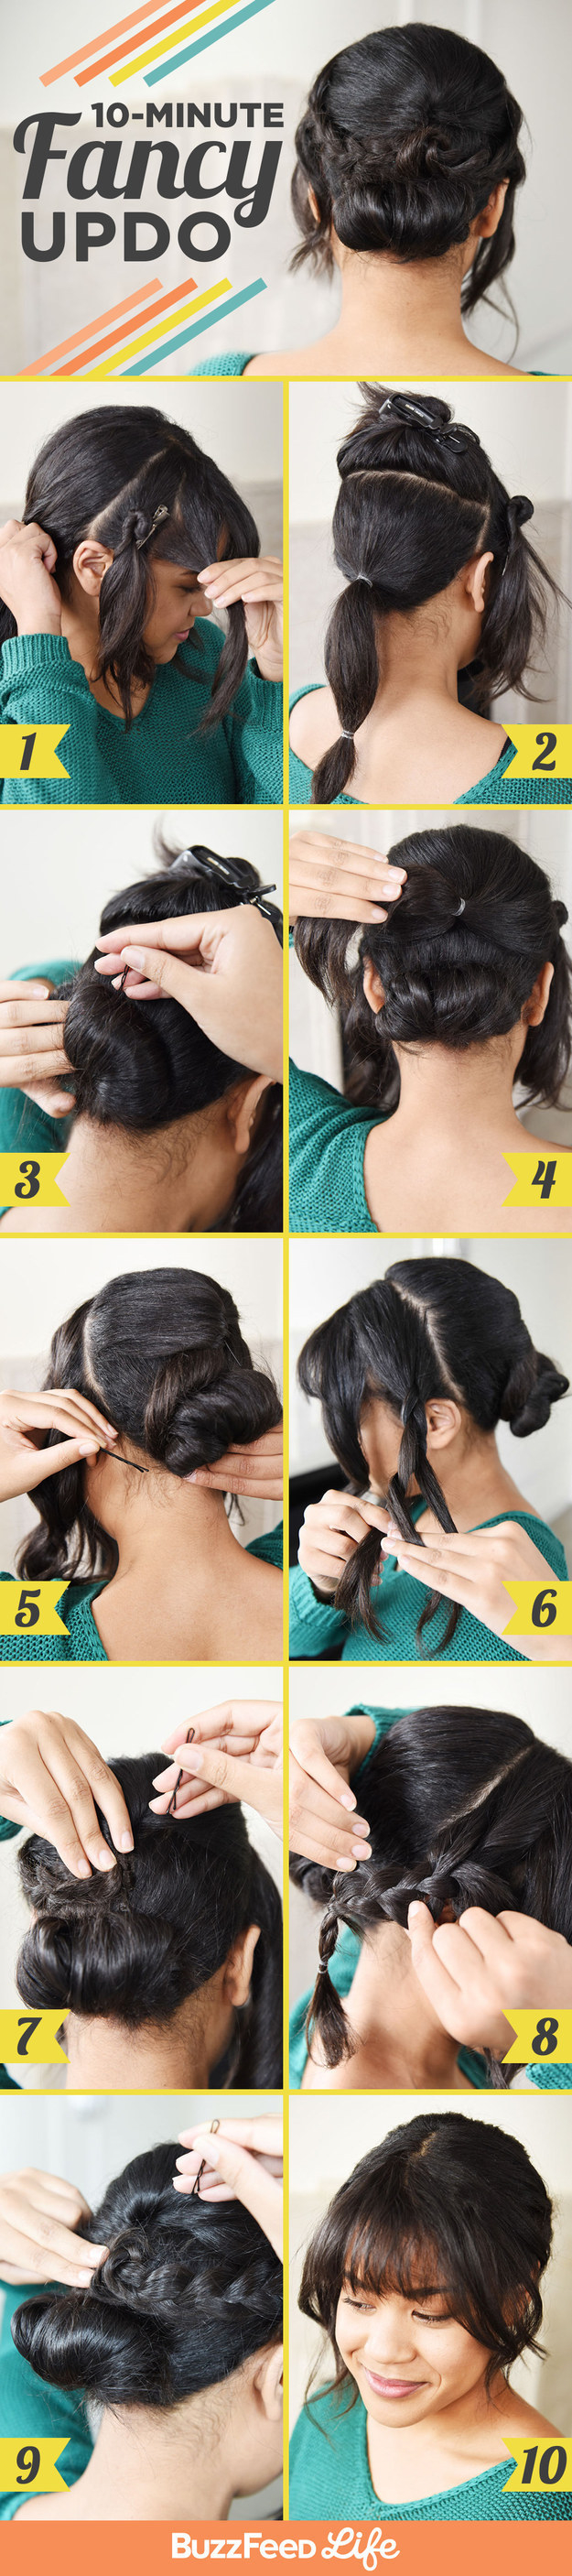 30 Hairstyles for Curly Hair That Are Simple and Chic